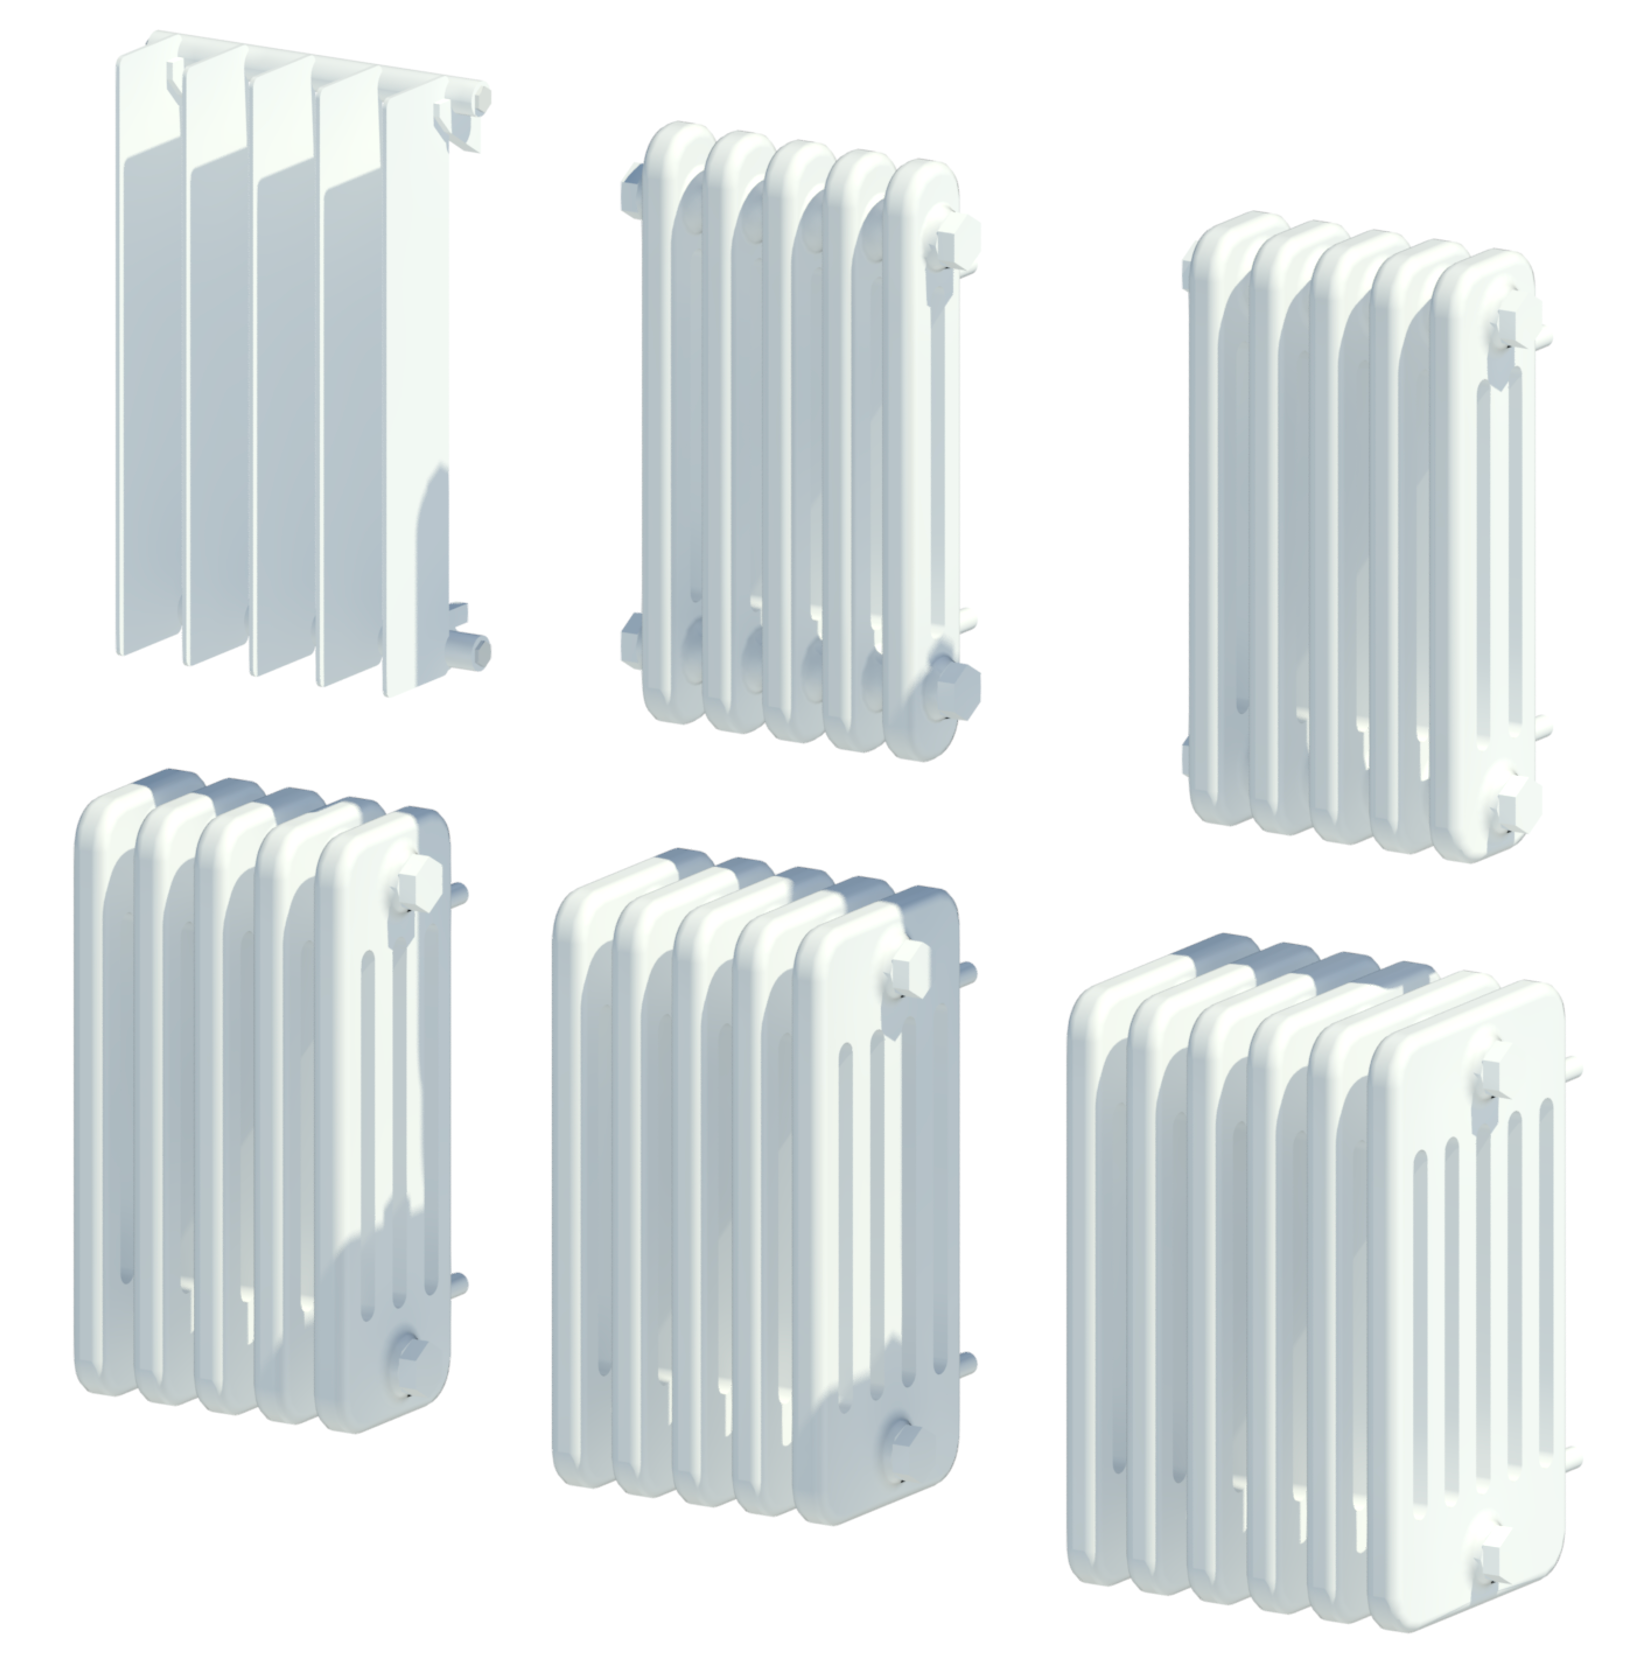 Revit render showing Runtal and Castrads radiators with column variations.